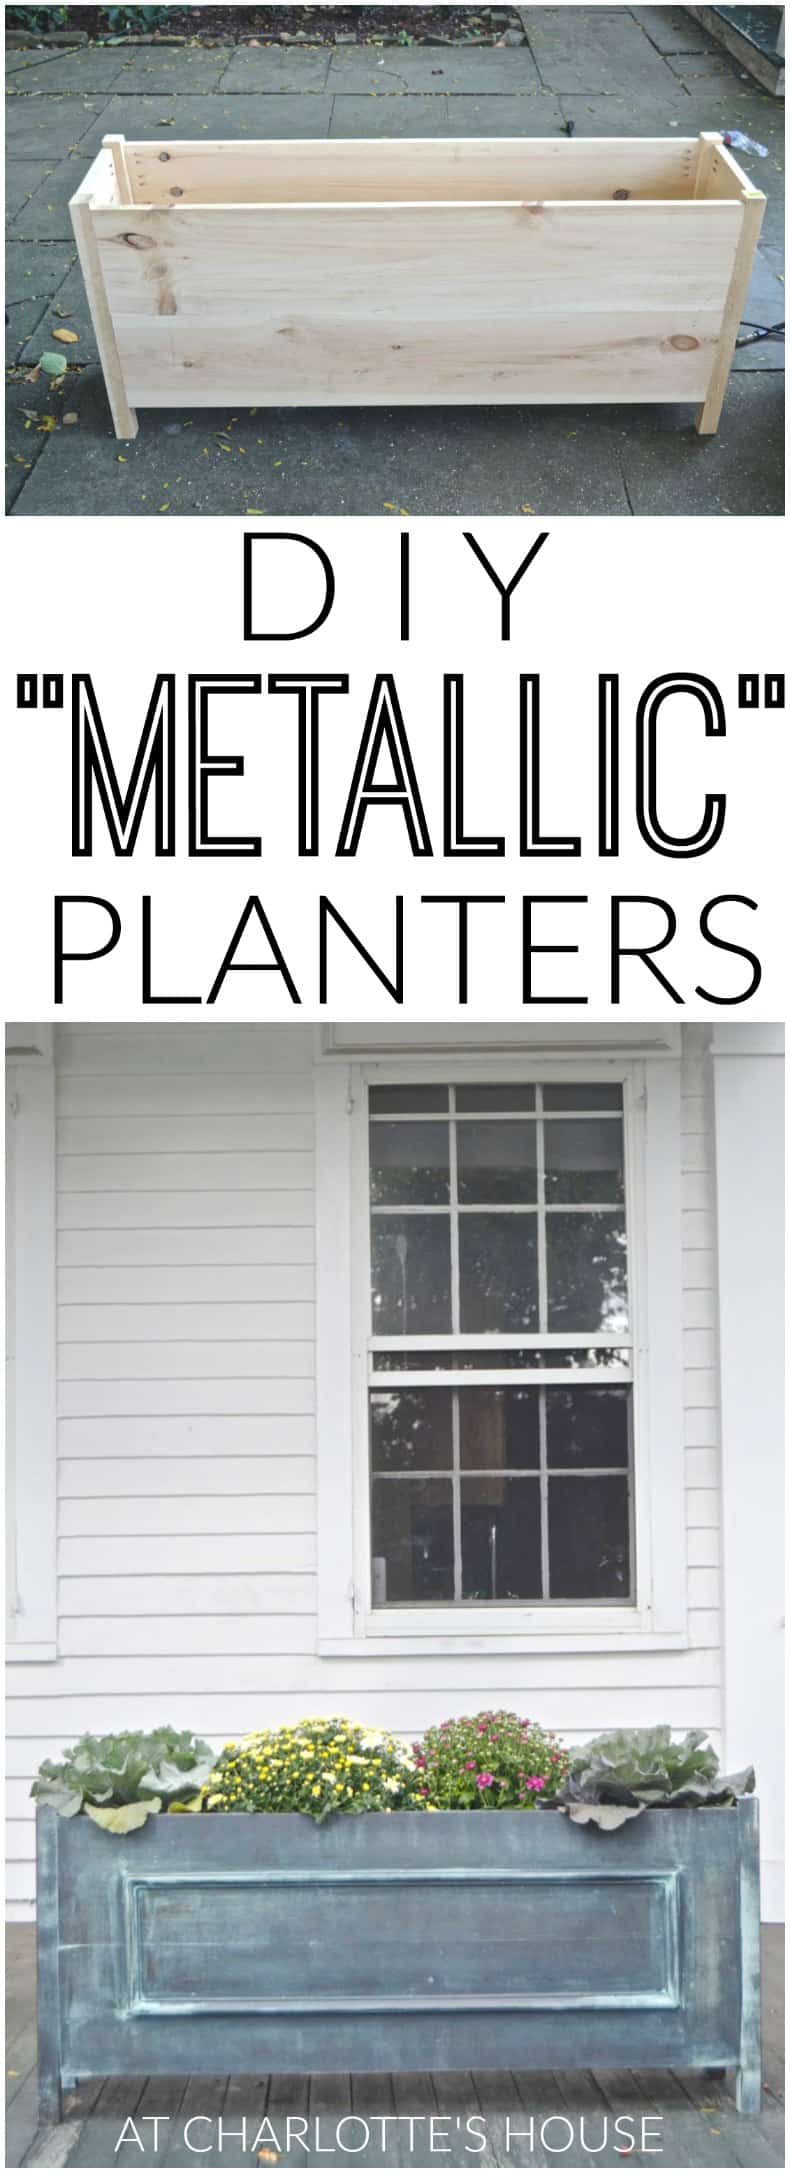 DIY wooden metallic planters with faux painting technique.